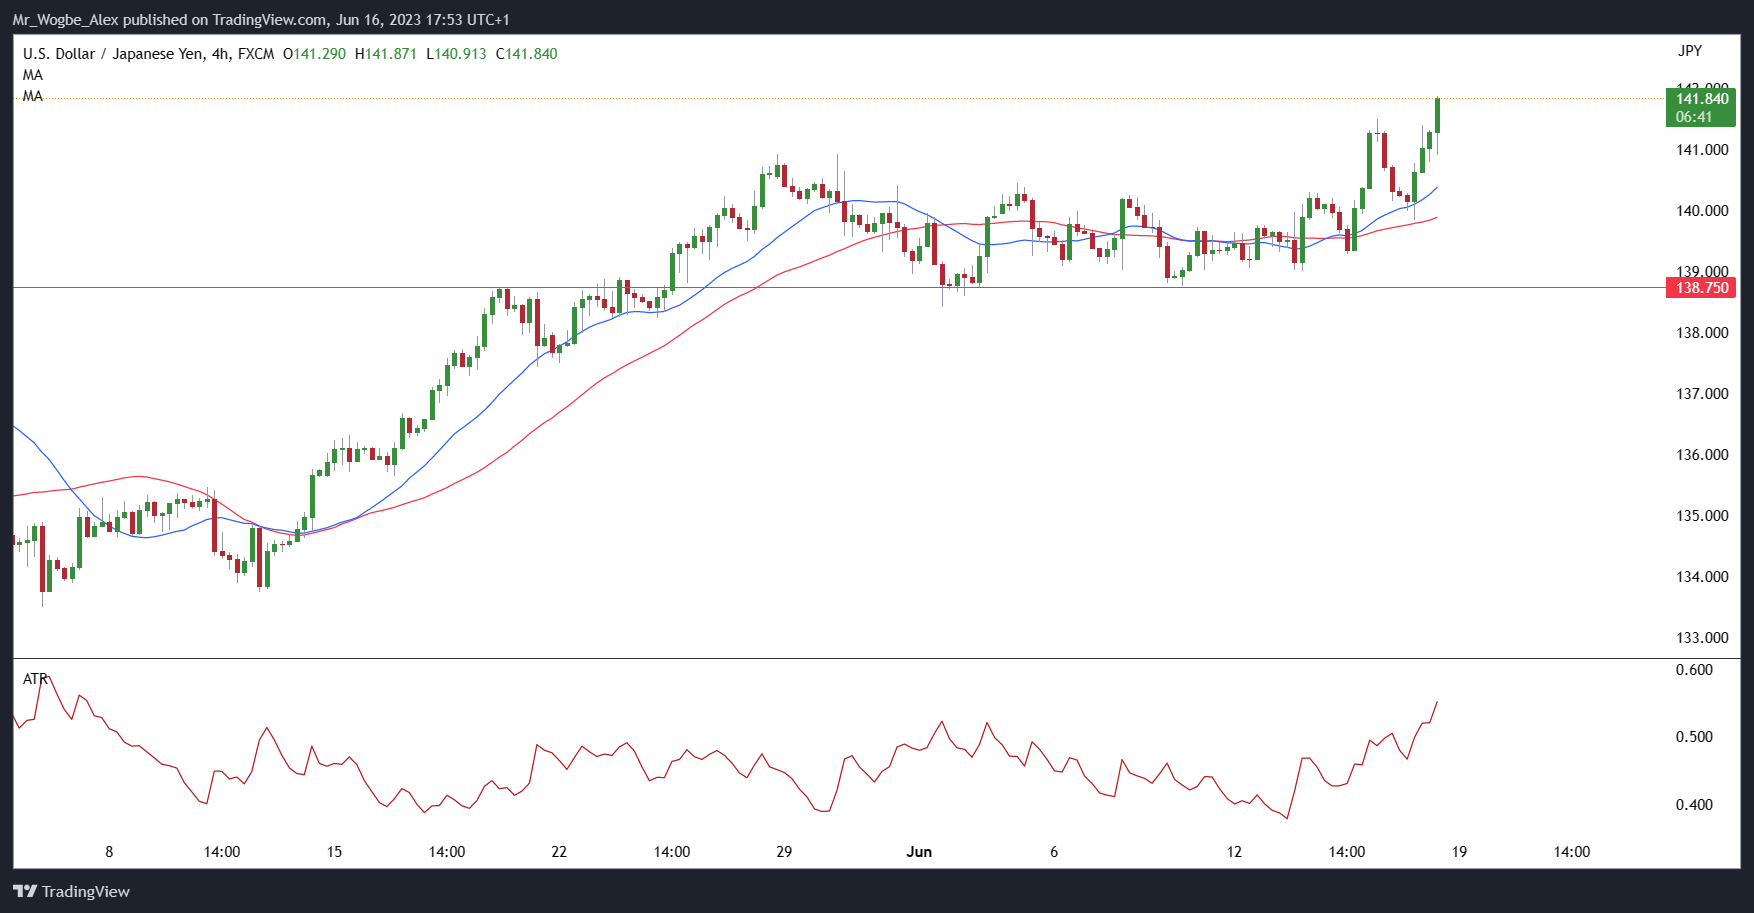 USD/JPY 4-hour chart from TradingView